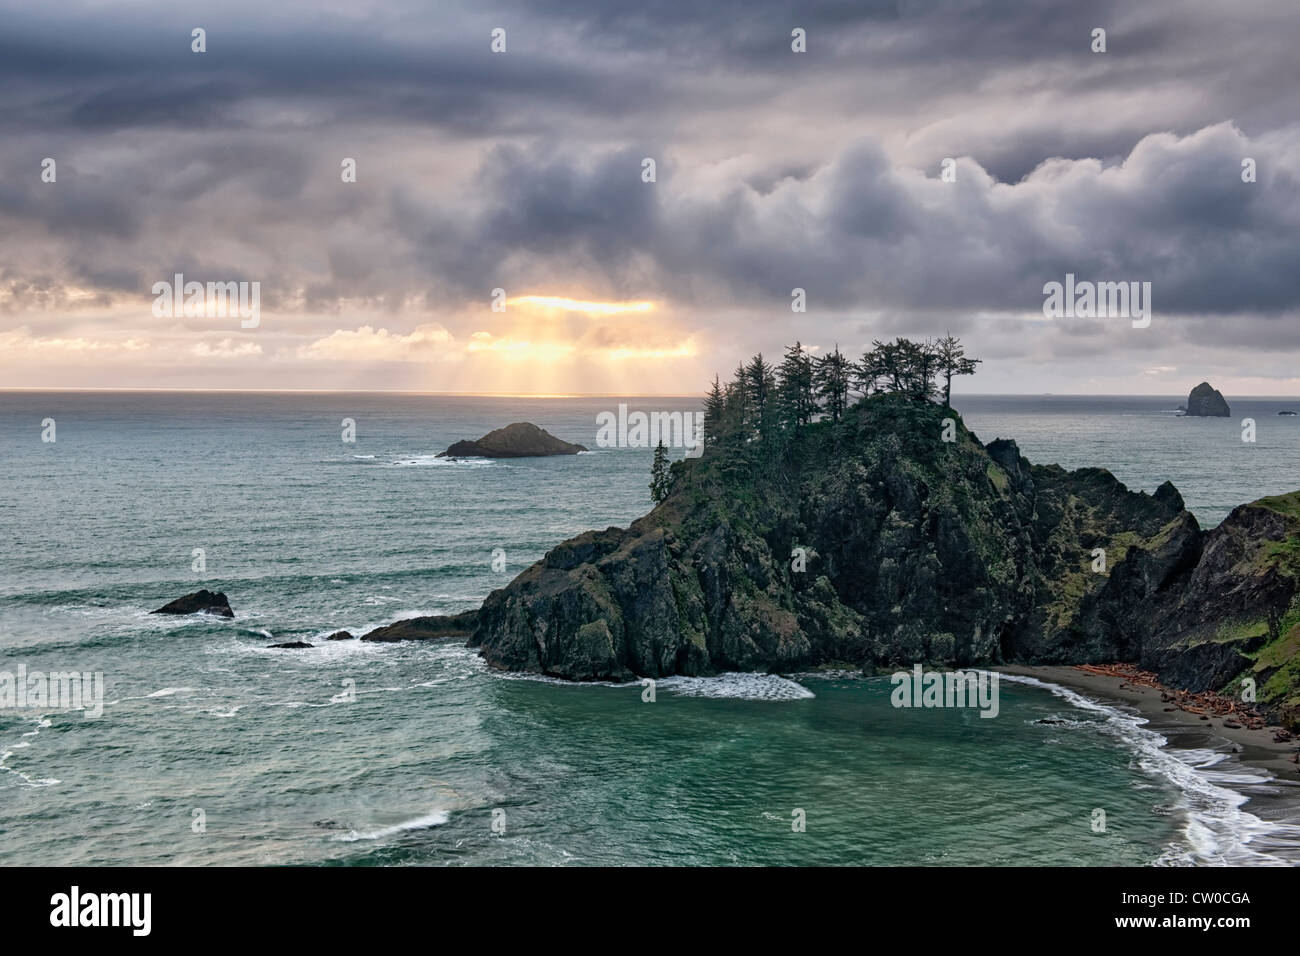 A brief clearing among the storm clouds at Oregon’s Boardman State Park and the south coastline of Curry County. Stock Photo